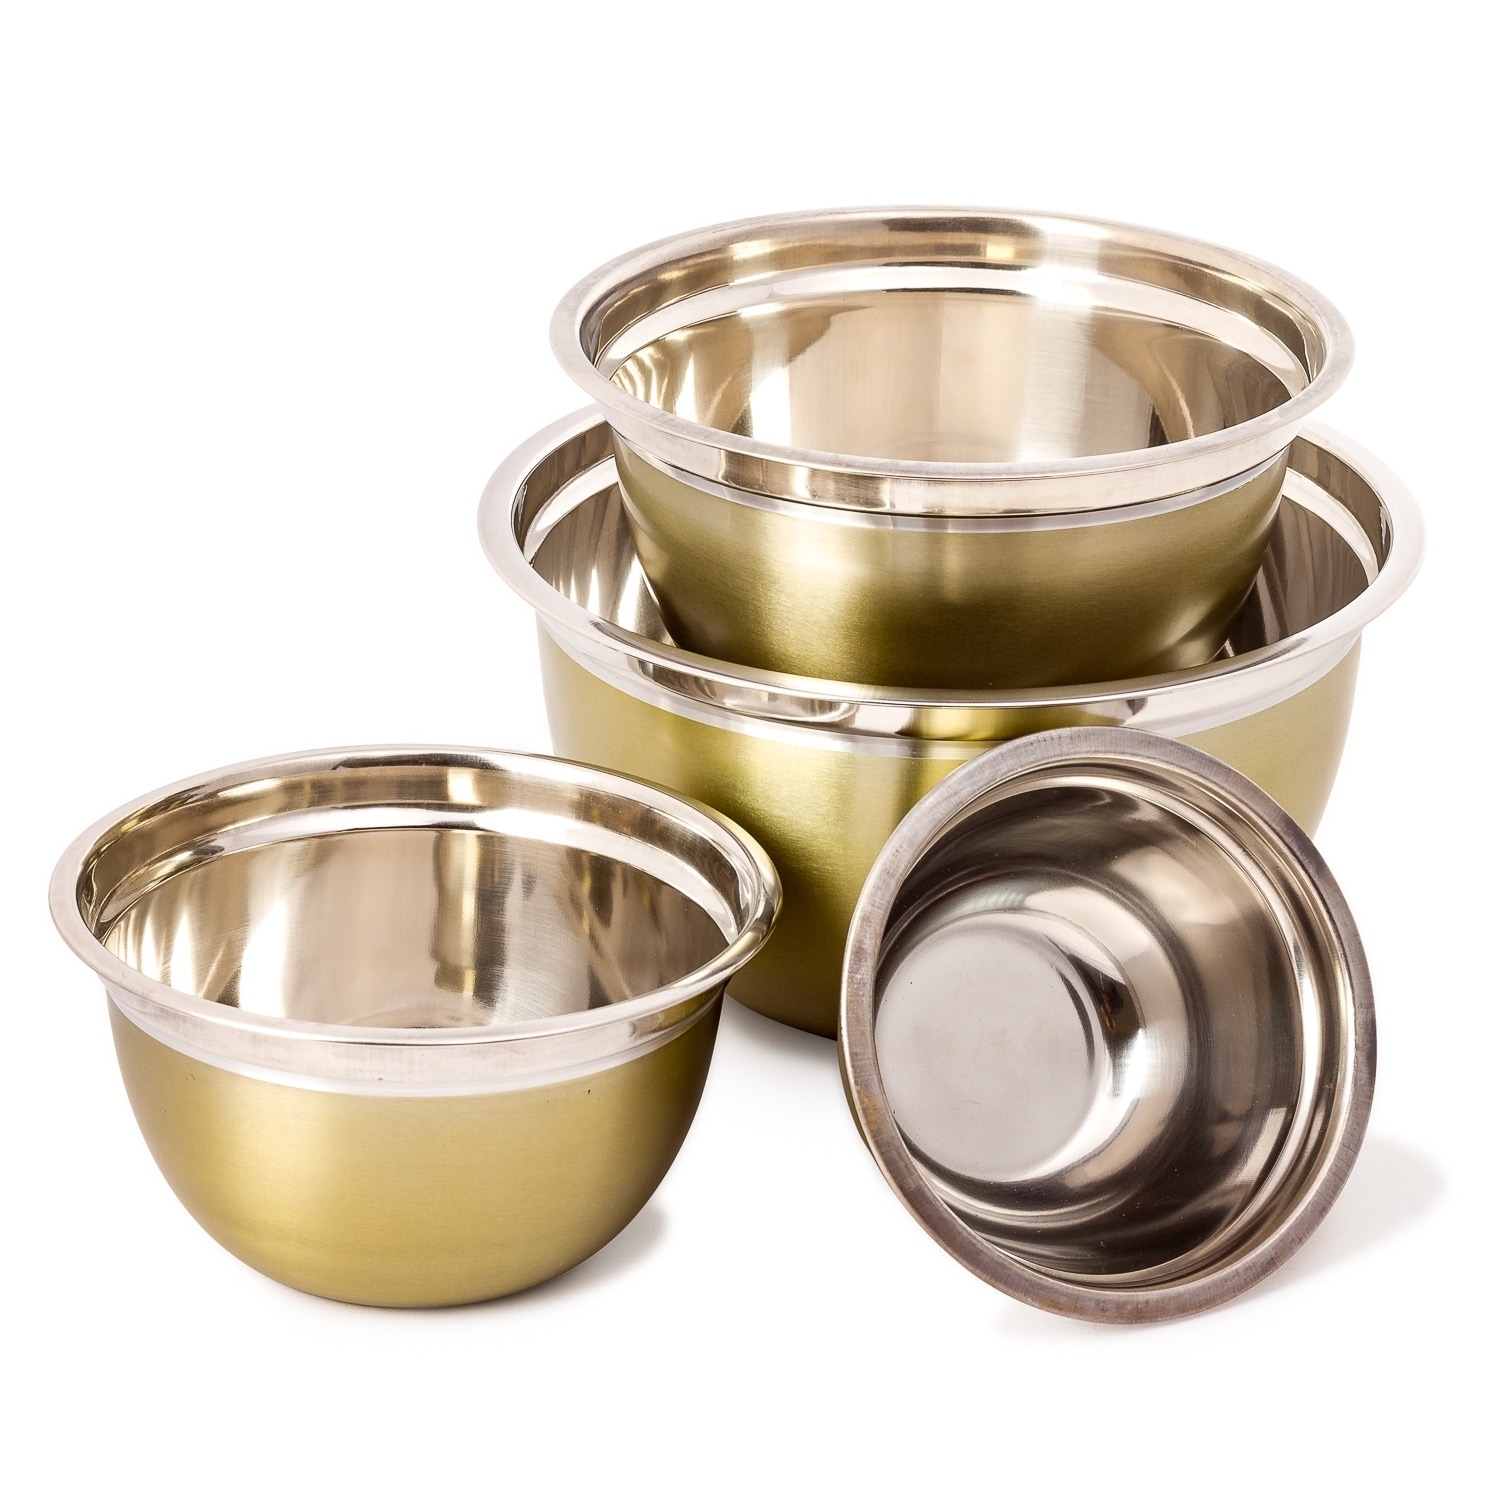 https://ak1.ostkcdn.com/images/products/26436272/Stainless-Steel-Mixing-Bowl-Set-of-4-High-Quality-Serving-Bowl-Gold-cb1a2806-46be-4683-b64f-bfbdeed5ba9b.jpg